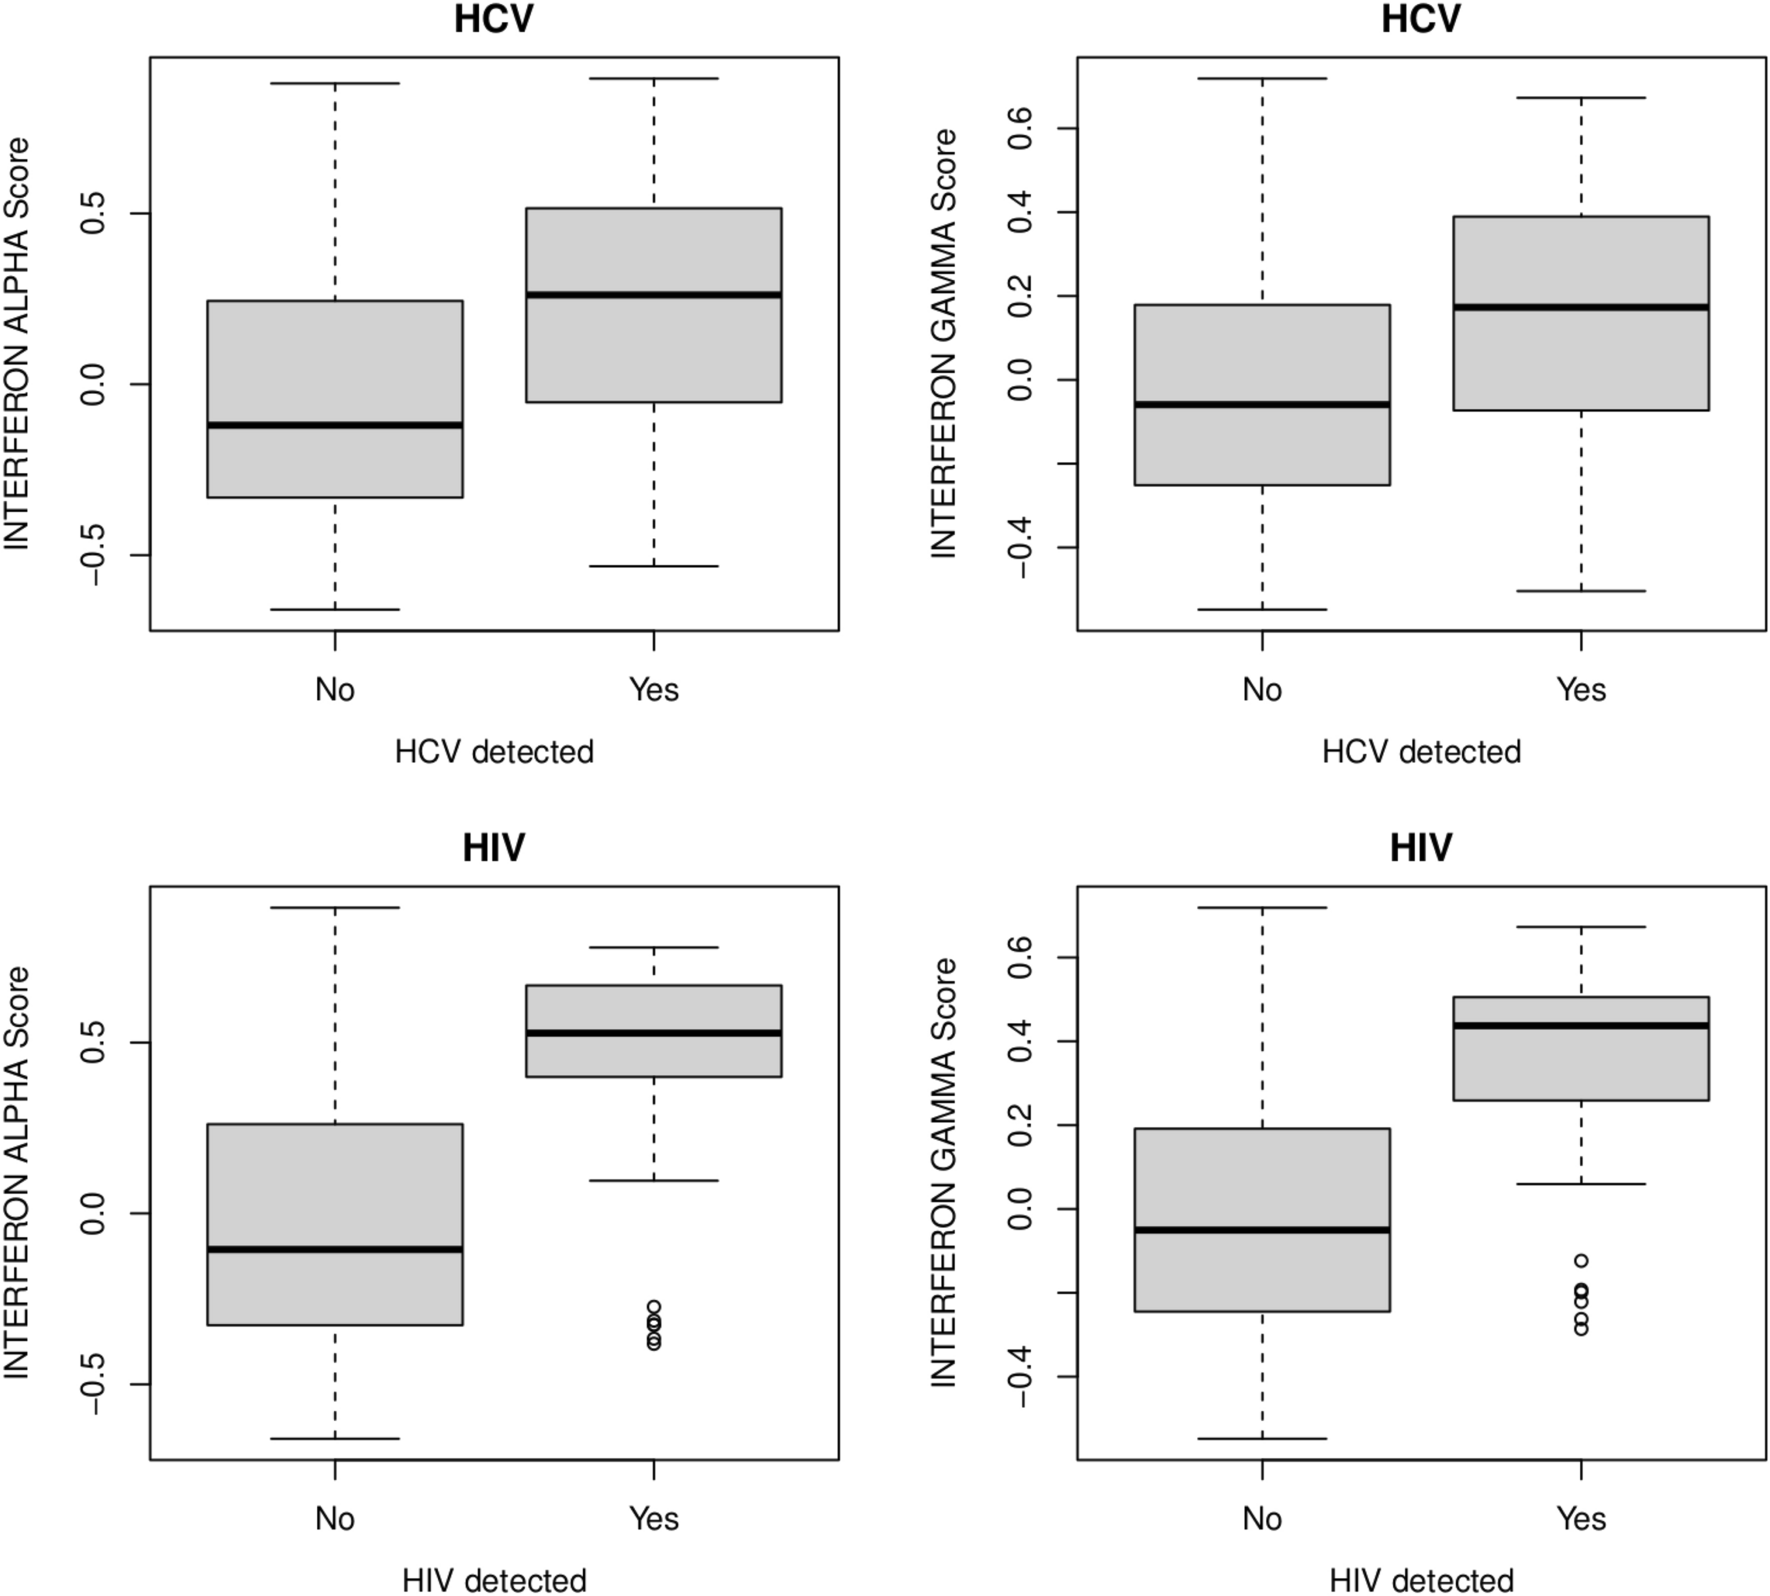 Hepatitis C and HIV detection by blood RNA-sequencing in cohort of smokers Scientific Reports